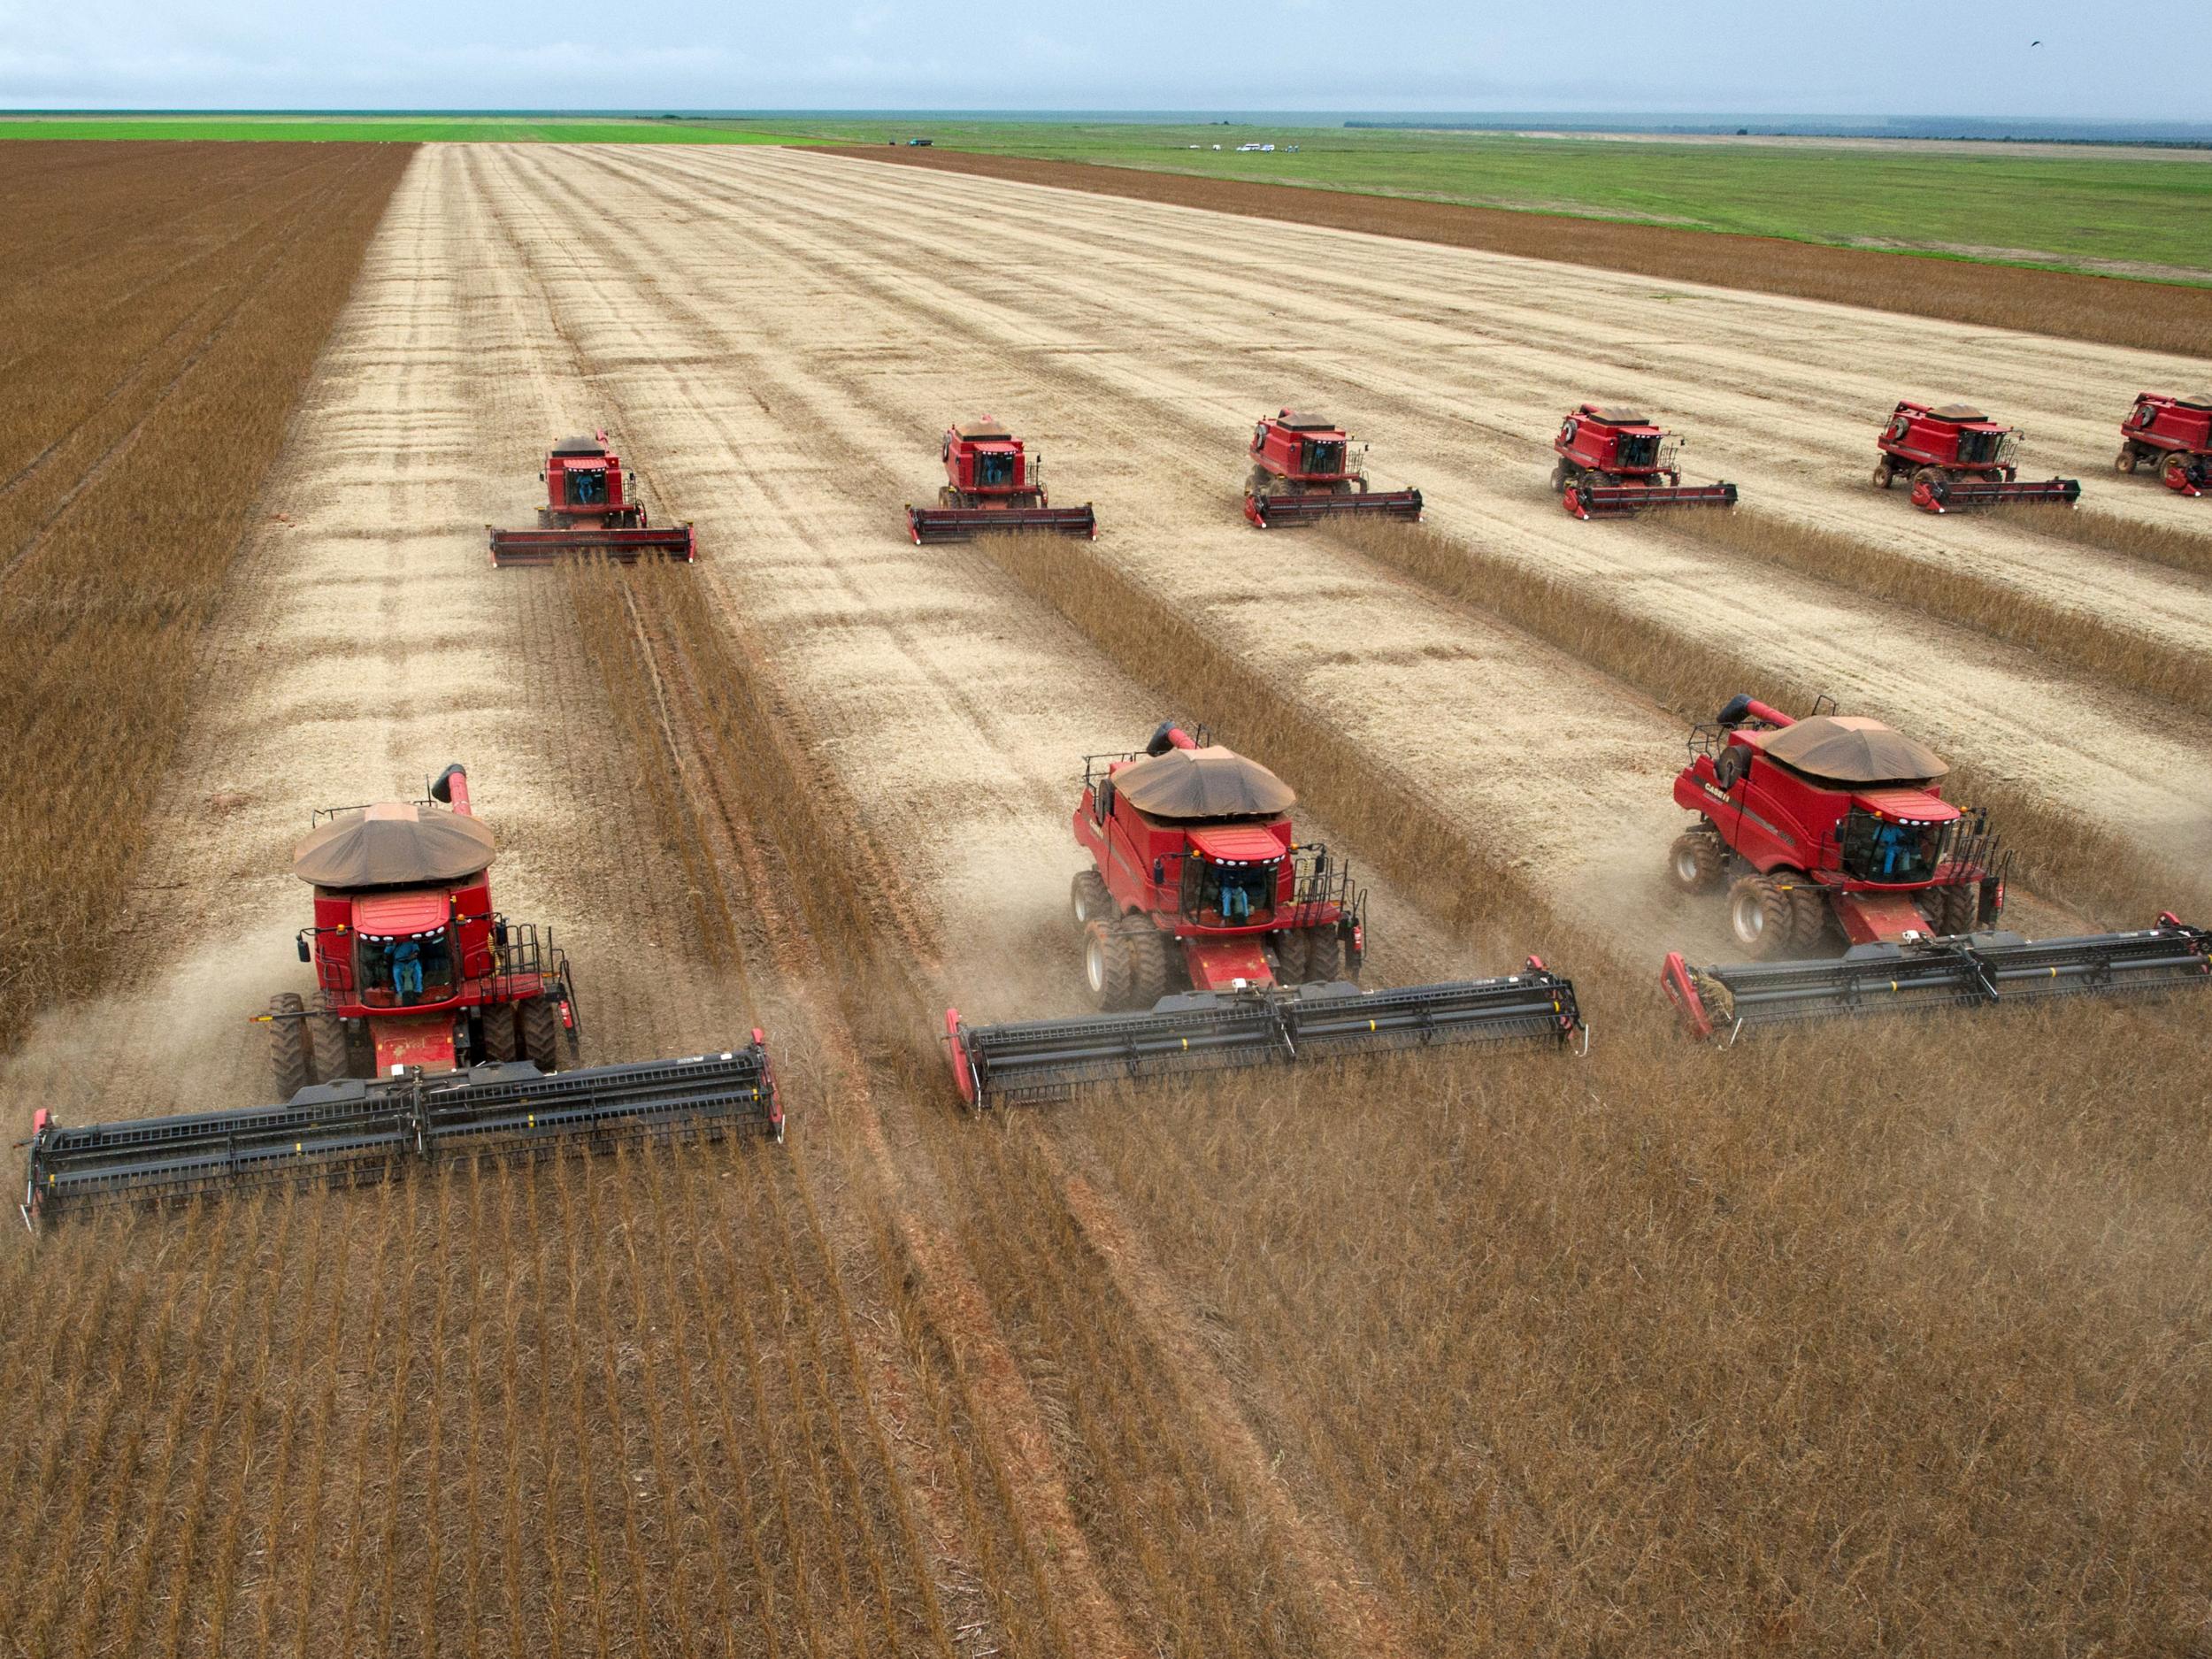 Combine harvesters crop soybeans in Campo Novo do Parecis, about 400km northwest from the capital city of Cuiaba, in Mato Grosso, Brazil